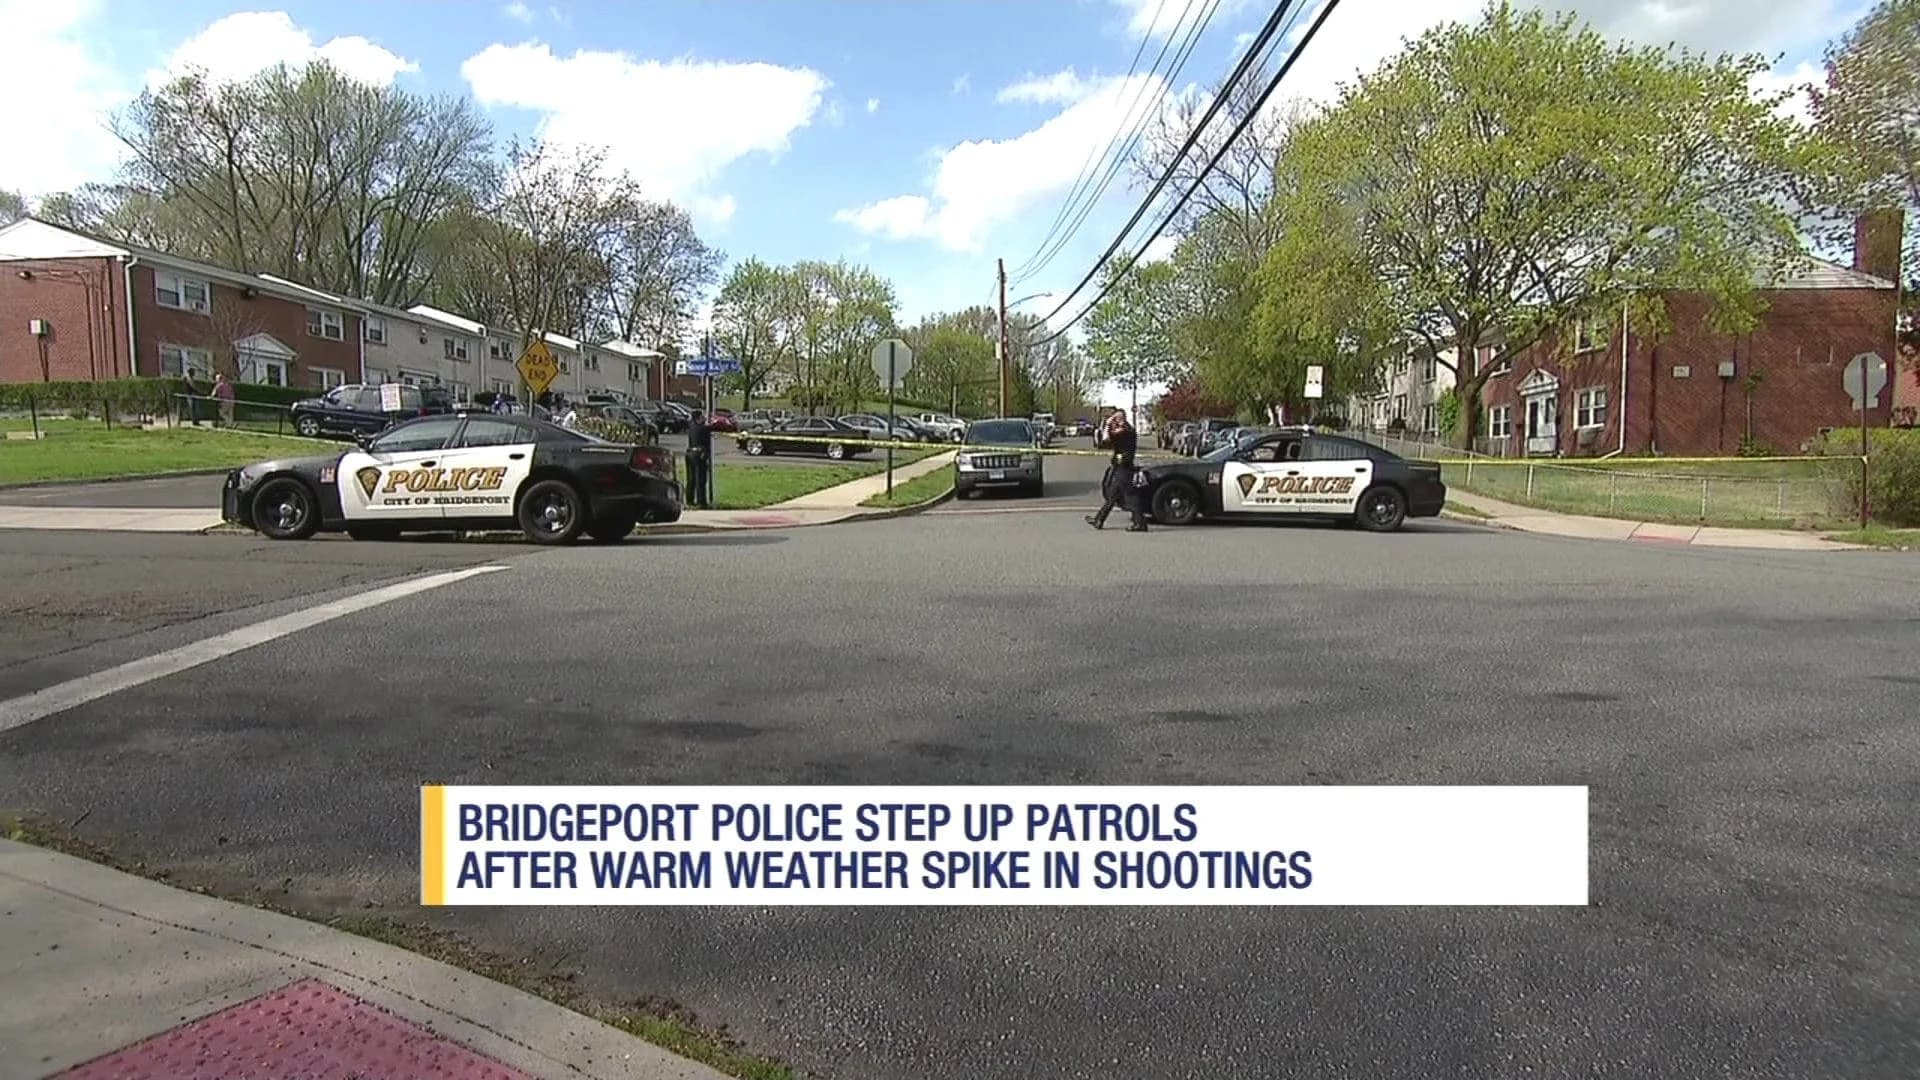 Bridgeport PD: Warm weather directly linked to spike in shootings